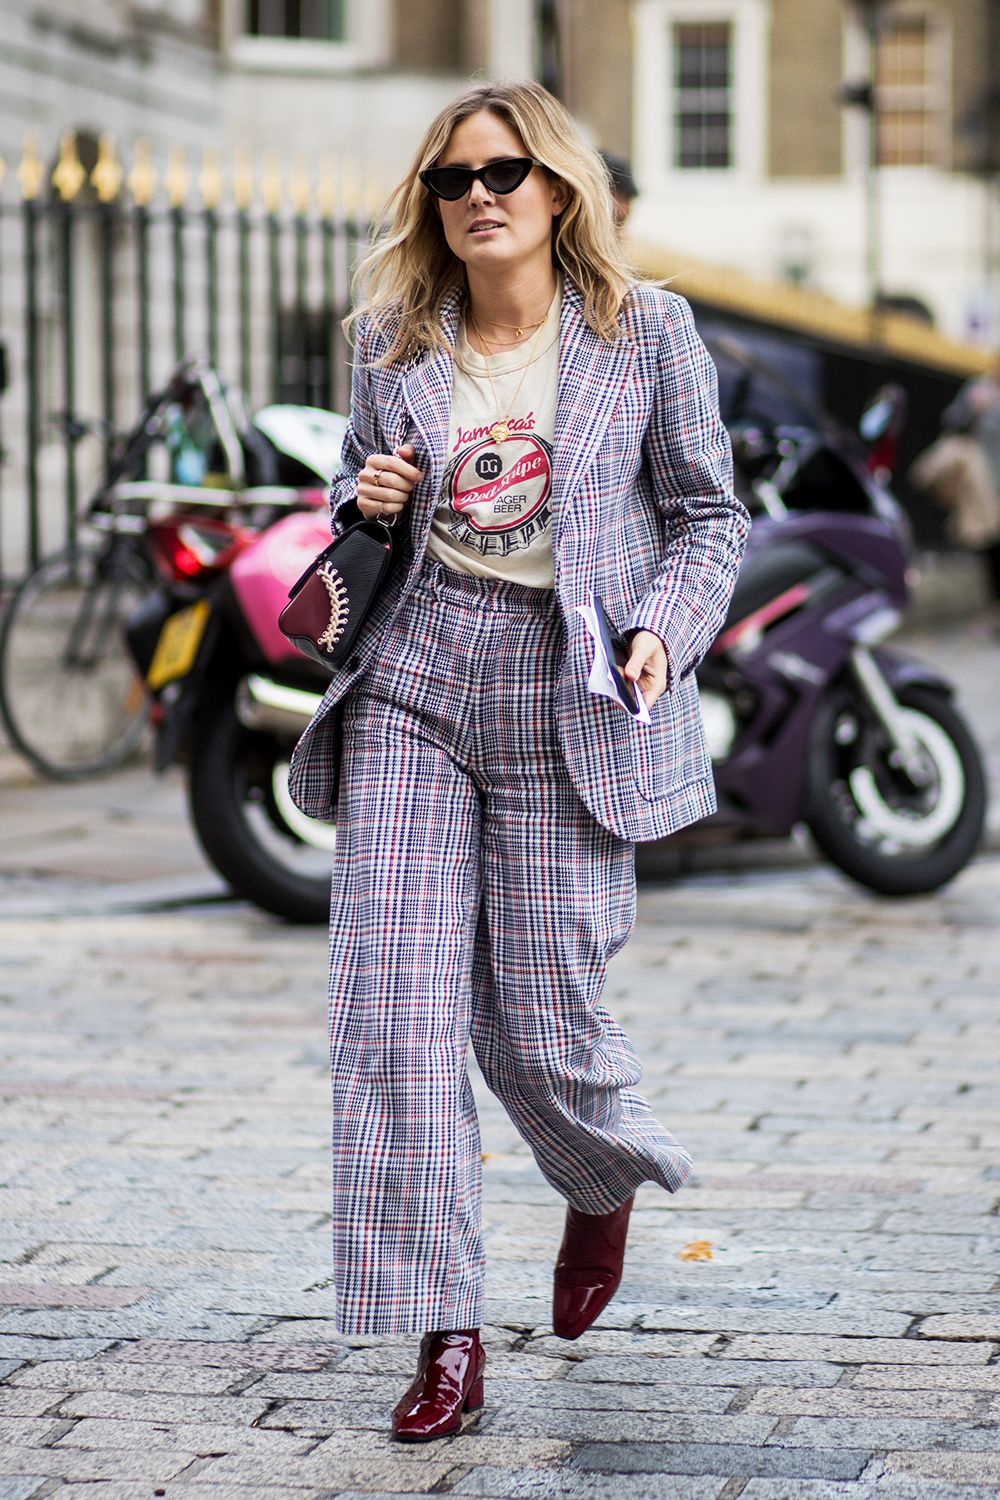 The Preppy Outfit Ideas British Girls Love | Who What Wear